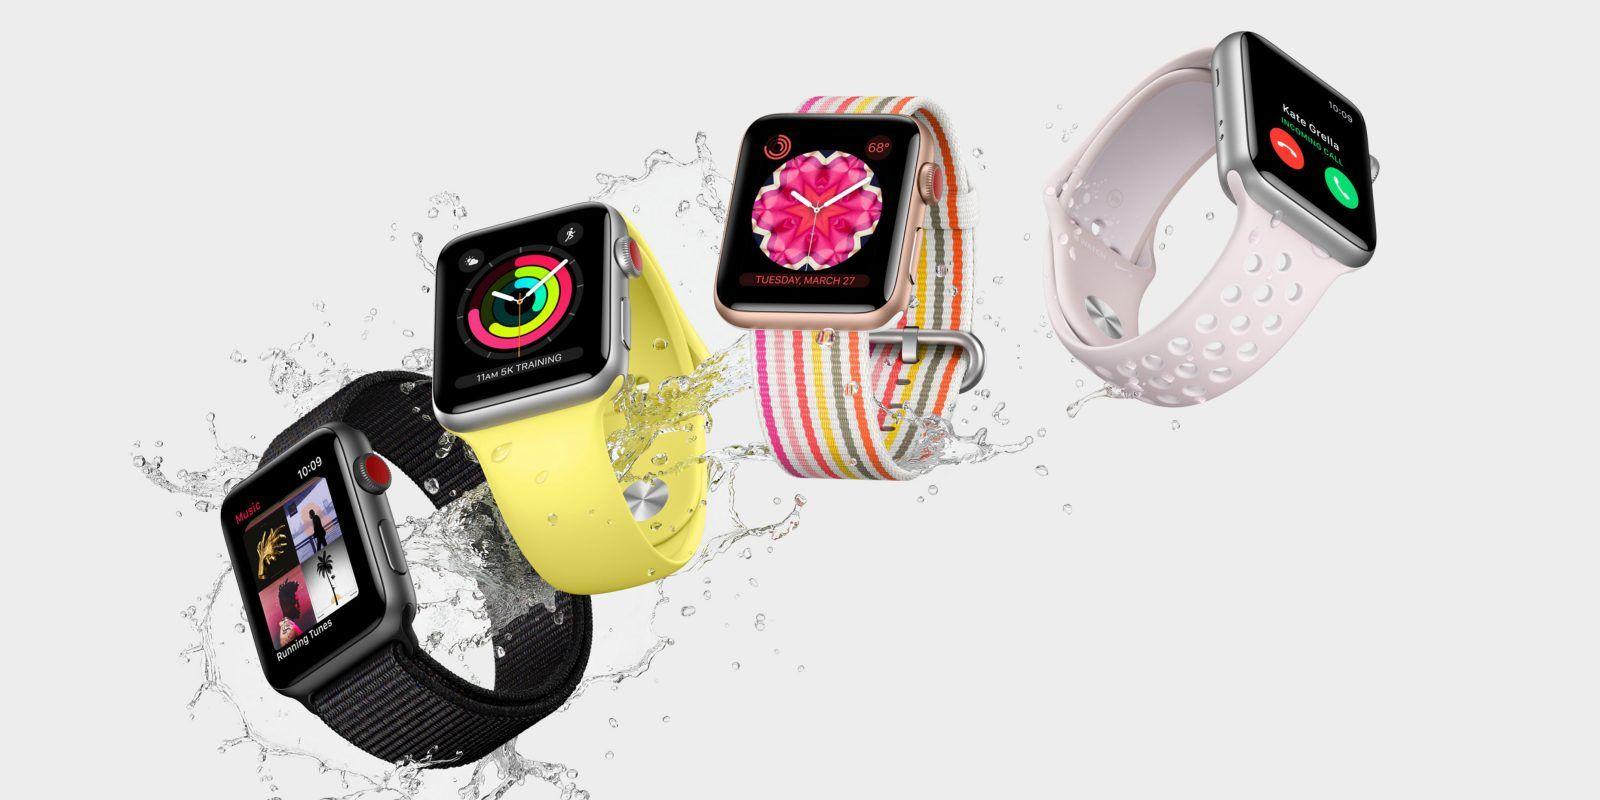 Apple Watch Logo - watchOS 4.3.1 now available for Apple Watch, includes startup bug